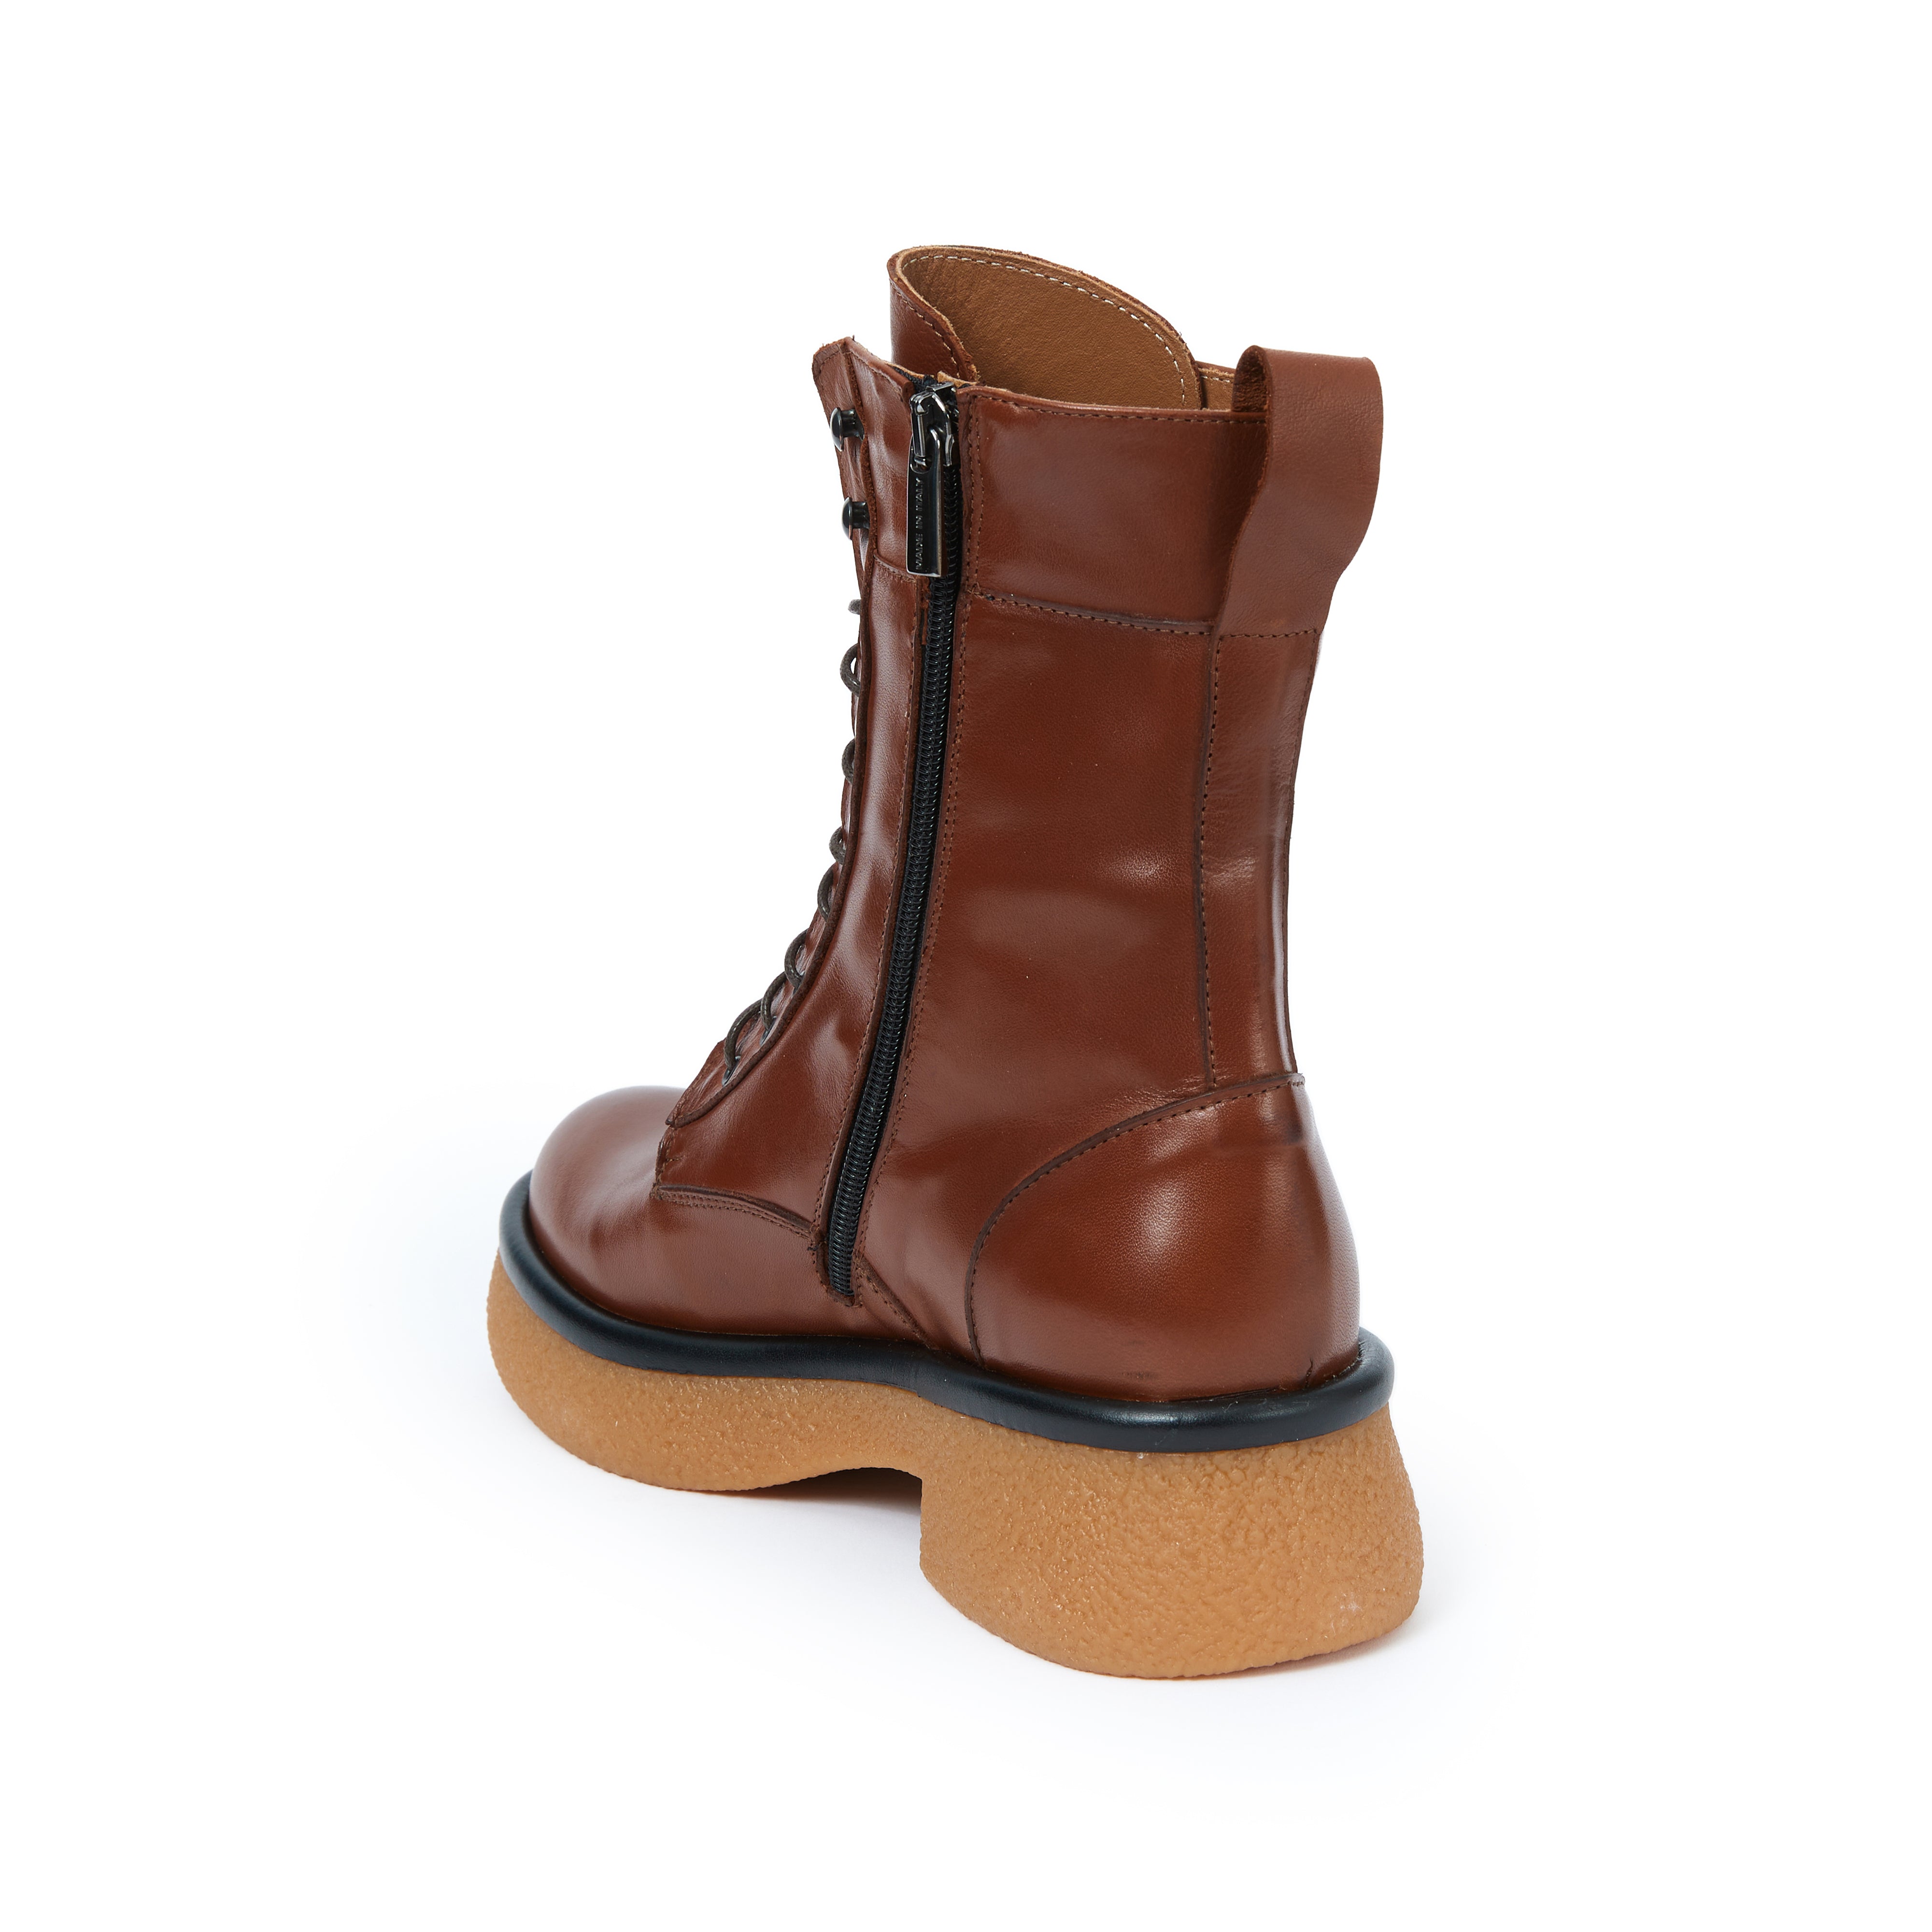 Lace-Up boot caramel brown